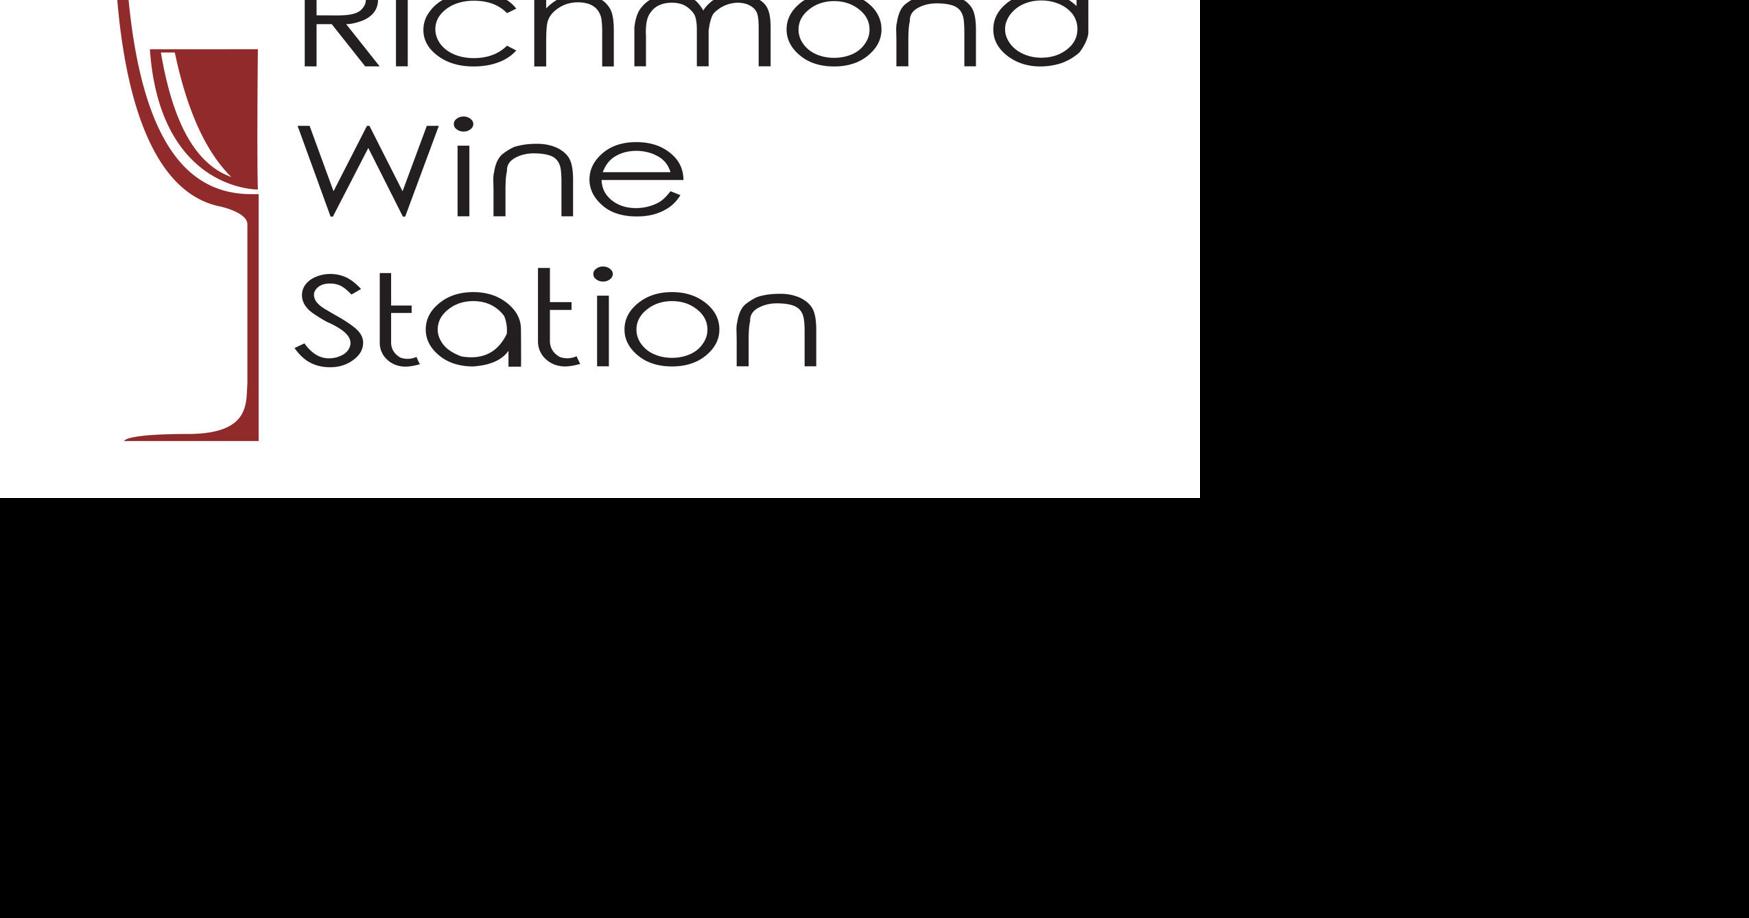 Richmond Wine Station is now open every day in Scott's Addition